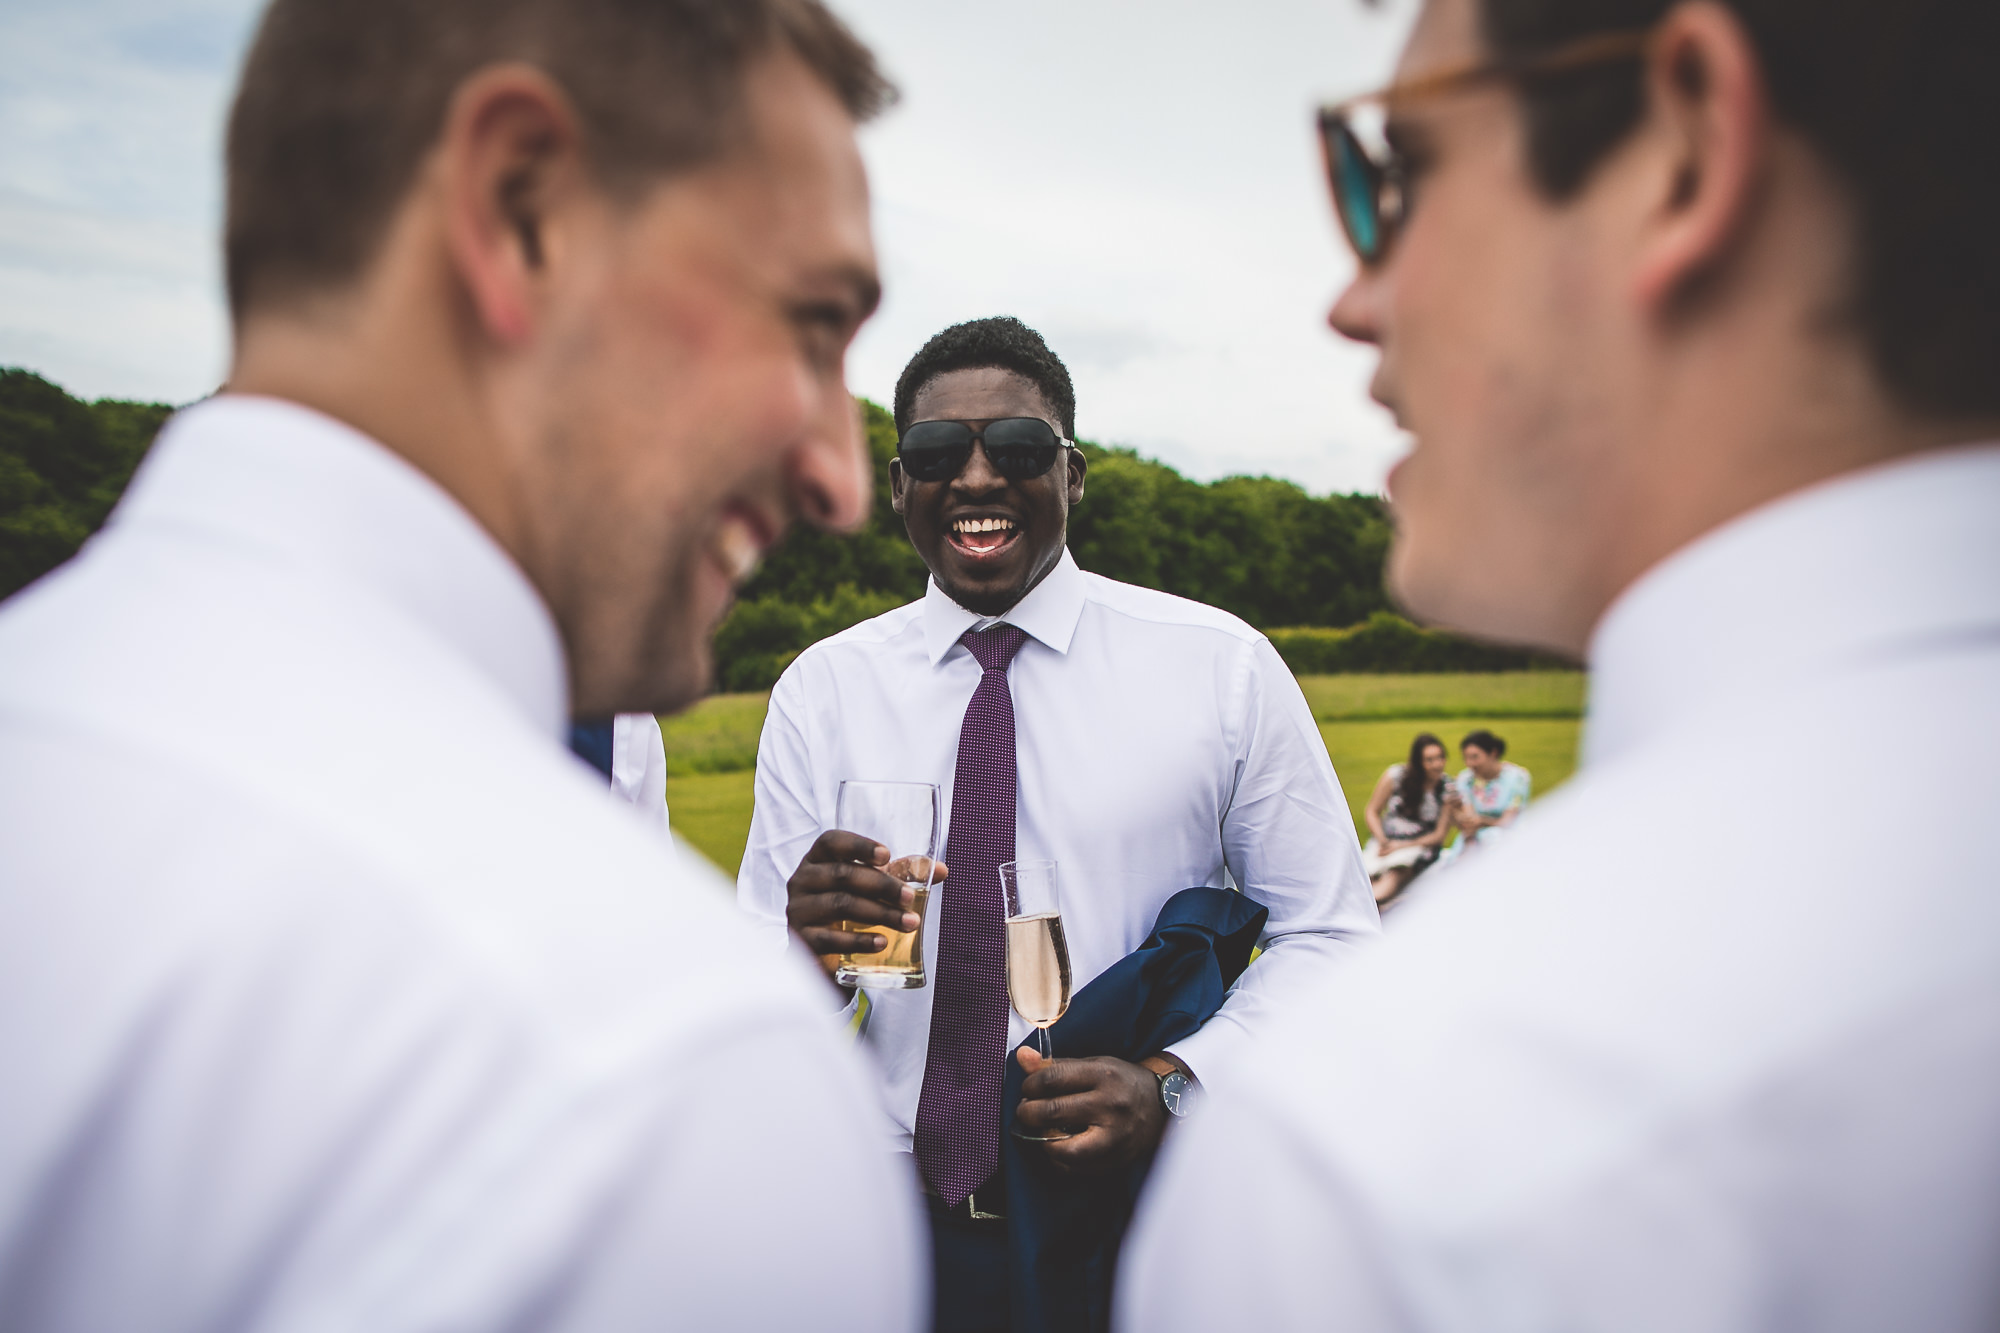 A group of men are laughing at each other in a field during a wedding photo.